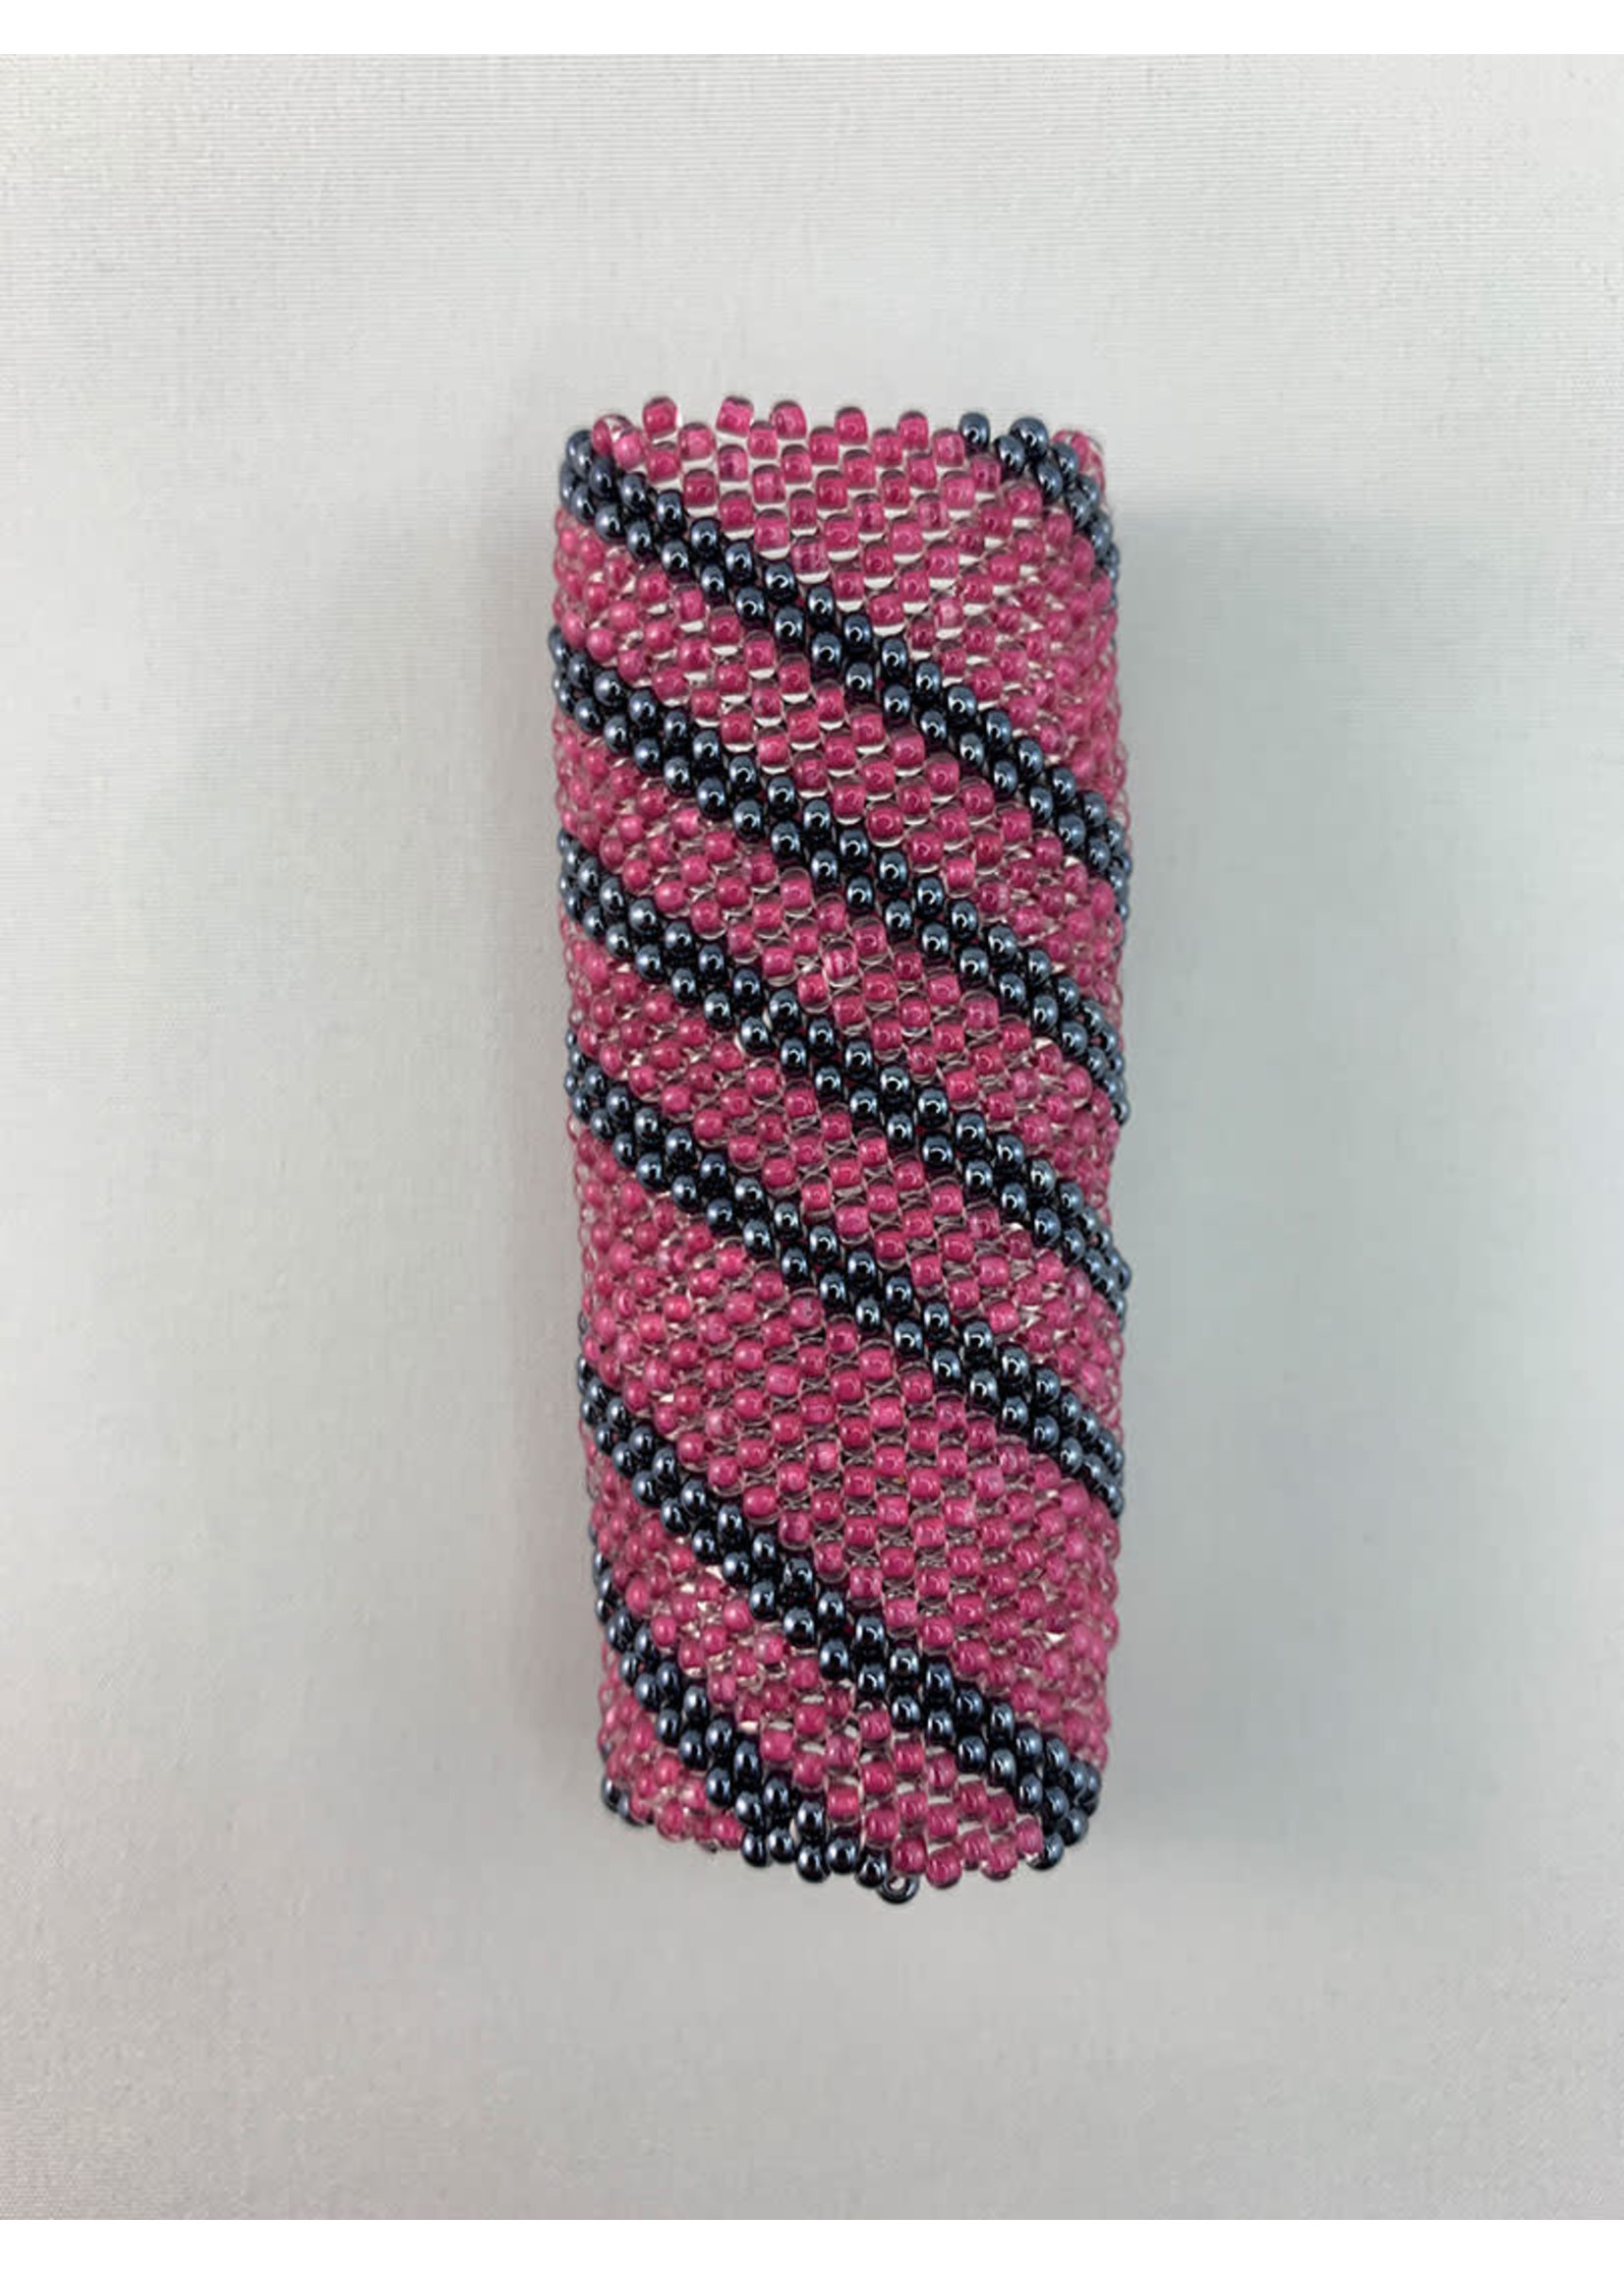 Circle of Eagles Beaded Lighter Case - Gunmetal and Clear Lined Pink (SOLD)